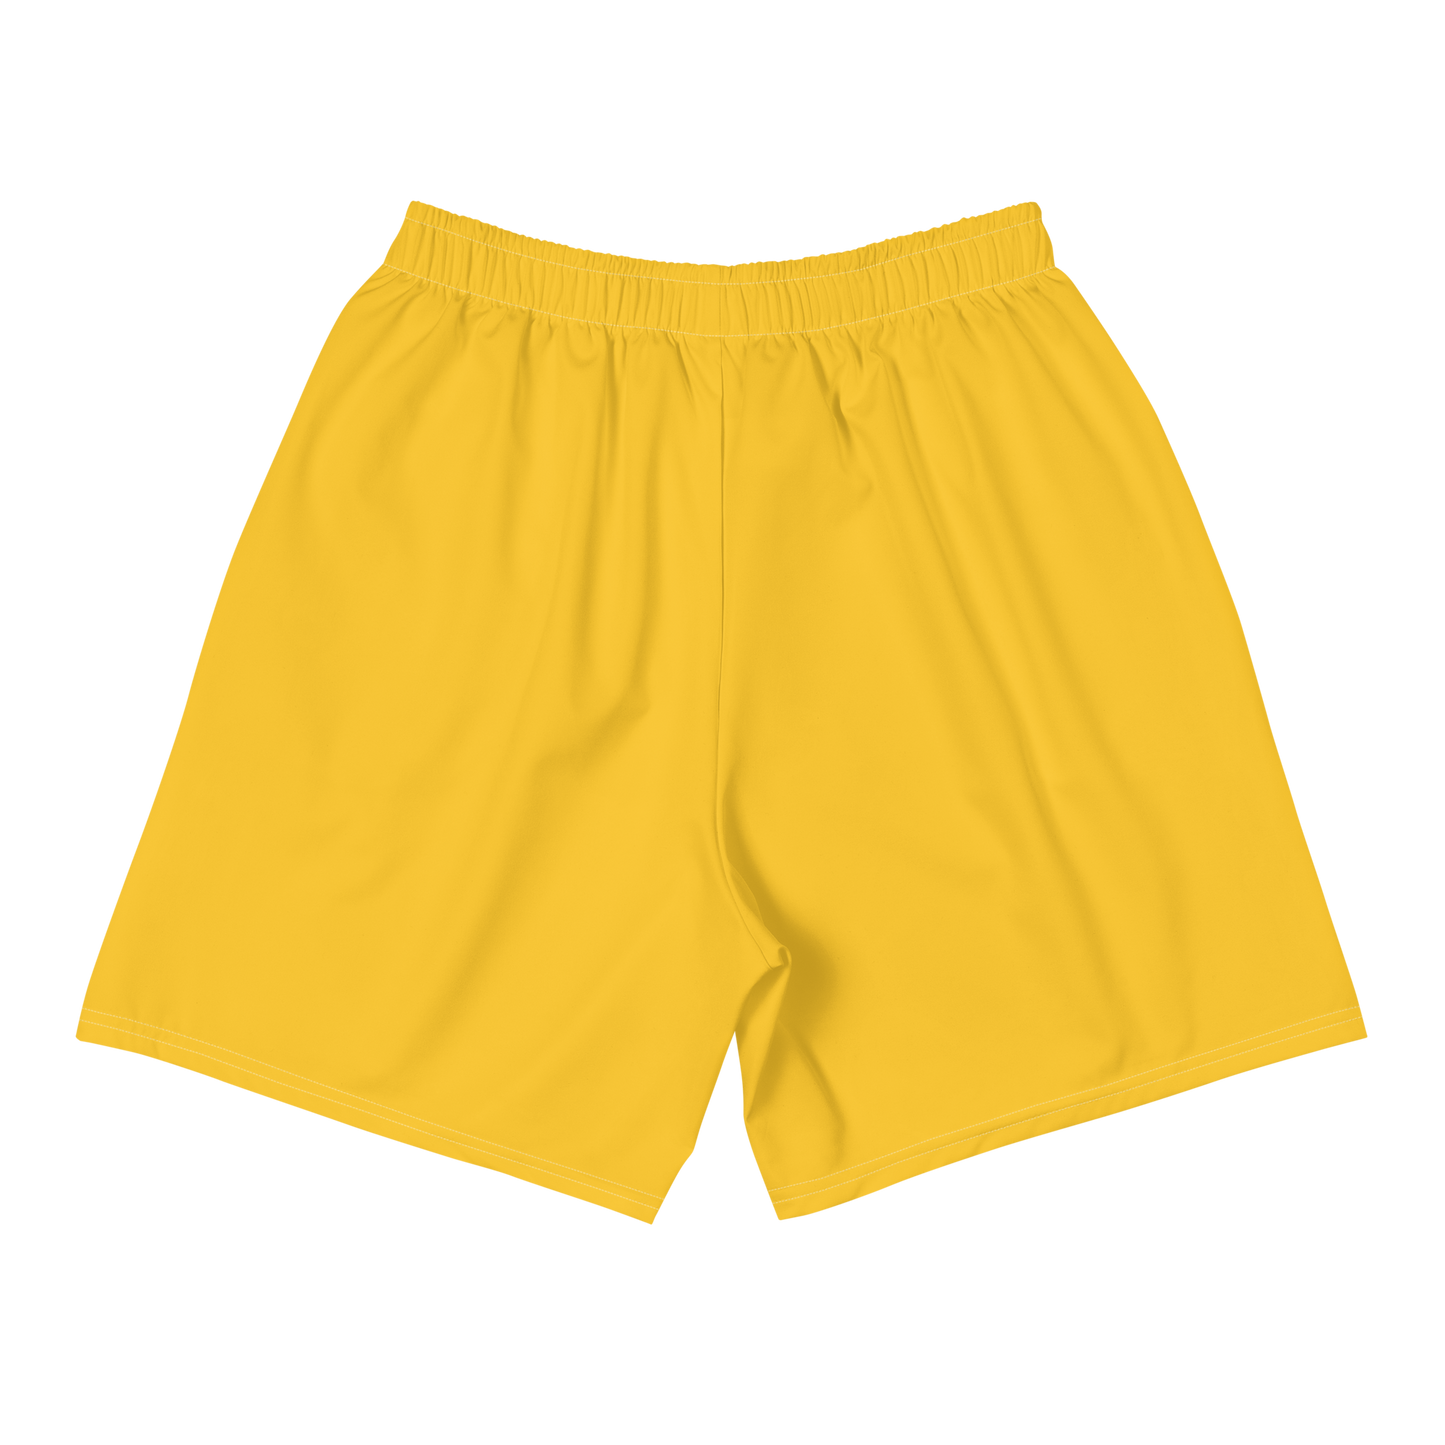 DWMD 'Stained Yellow' Shorts